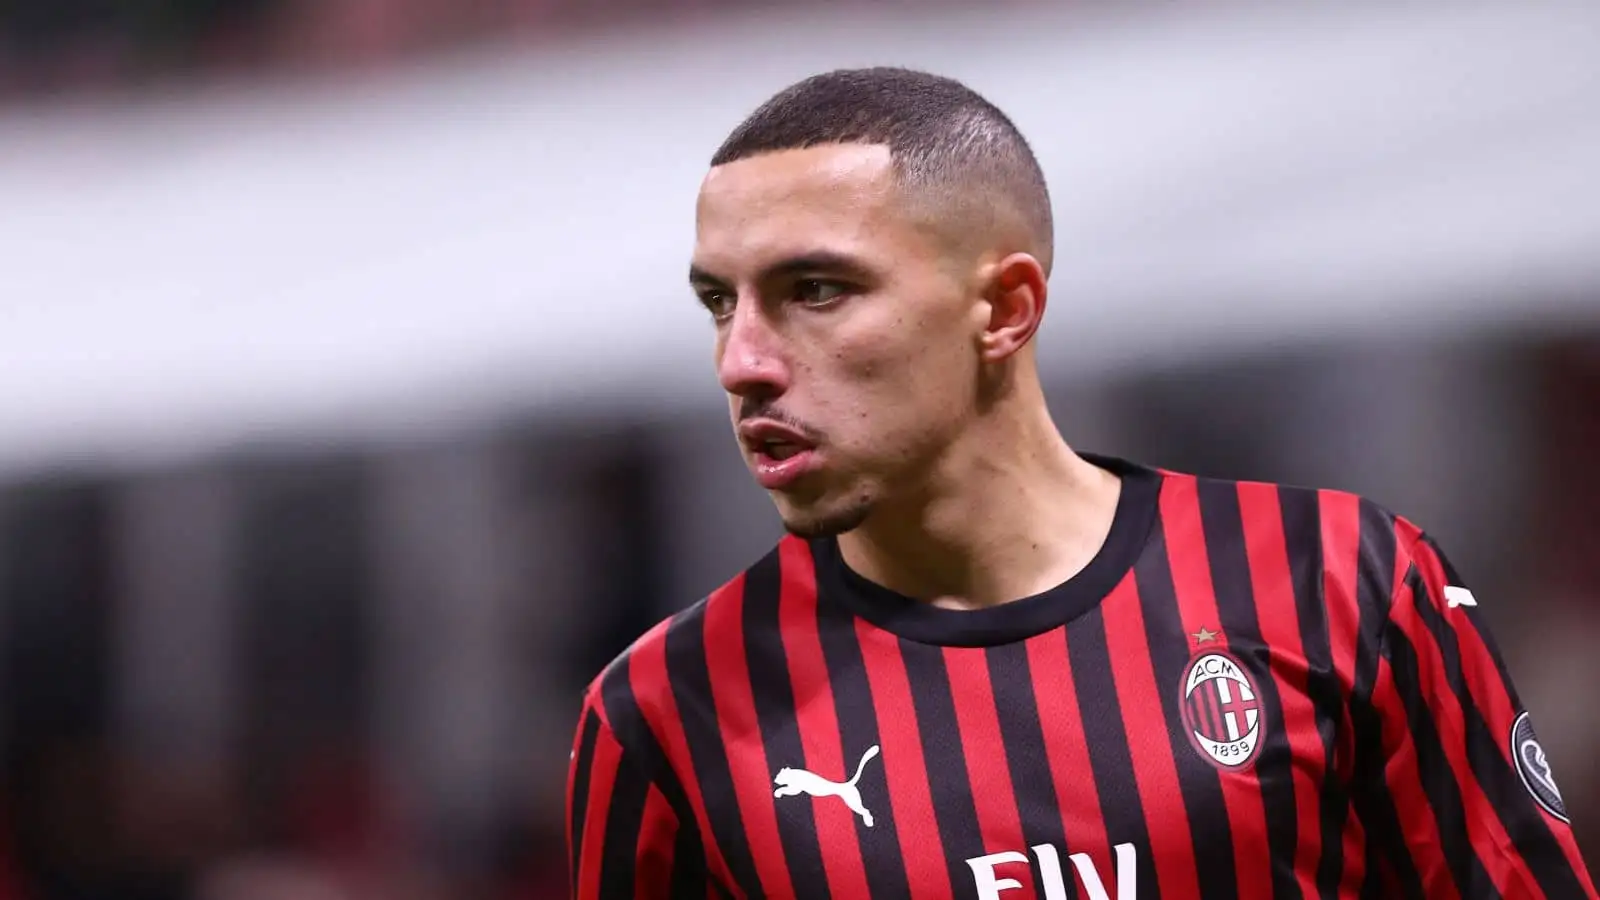 Transfer Gossip: Liverpool cleared to sign £35m Milan star as triple swap deal talk emerges; Tottenham open bidding at £25m for Netherlands star